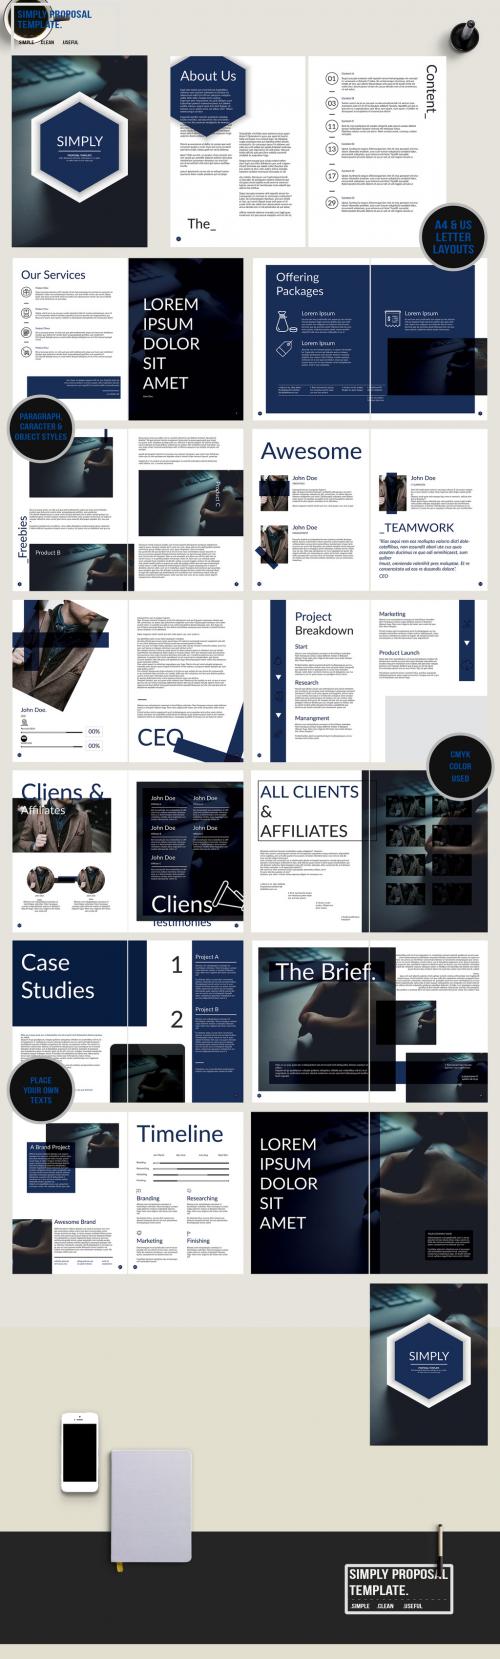 Adobe Stock - Business Proposal Layout with Blue Accents - 199989146